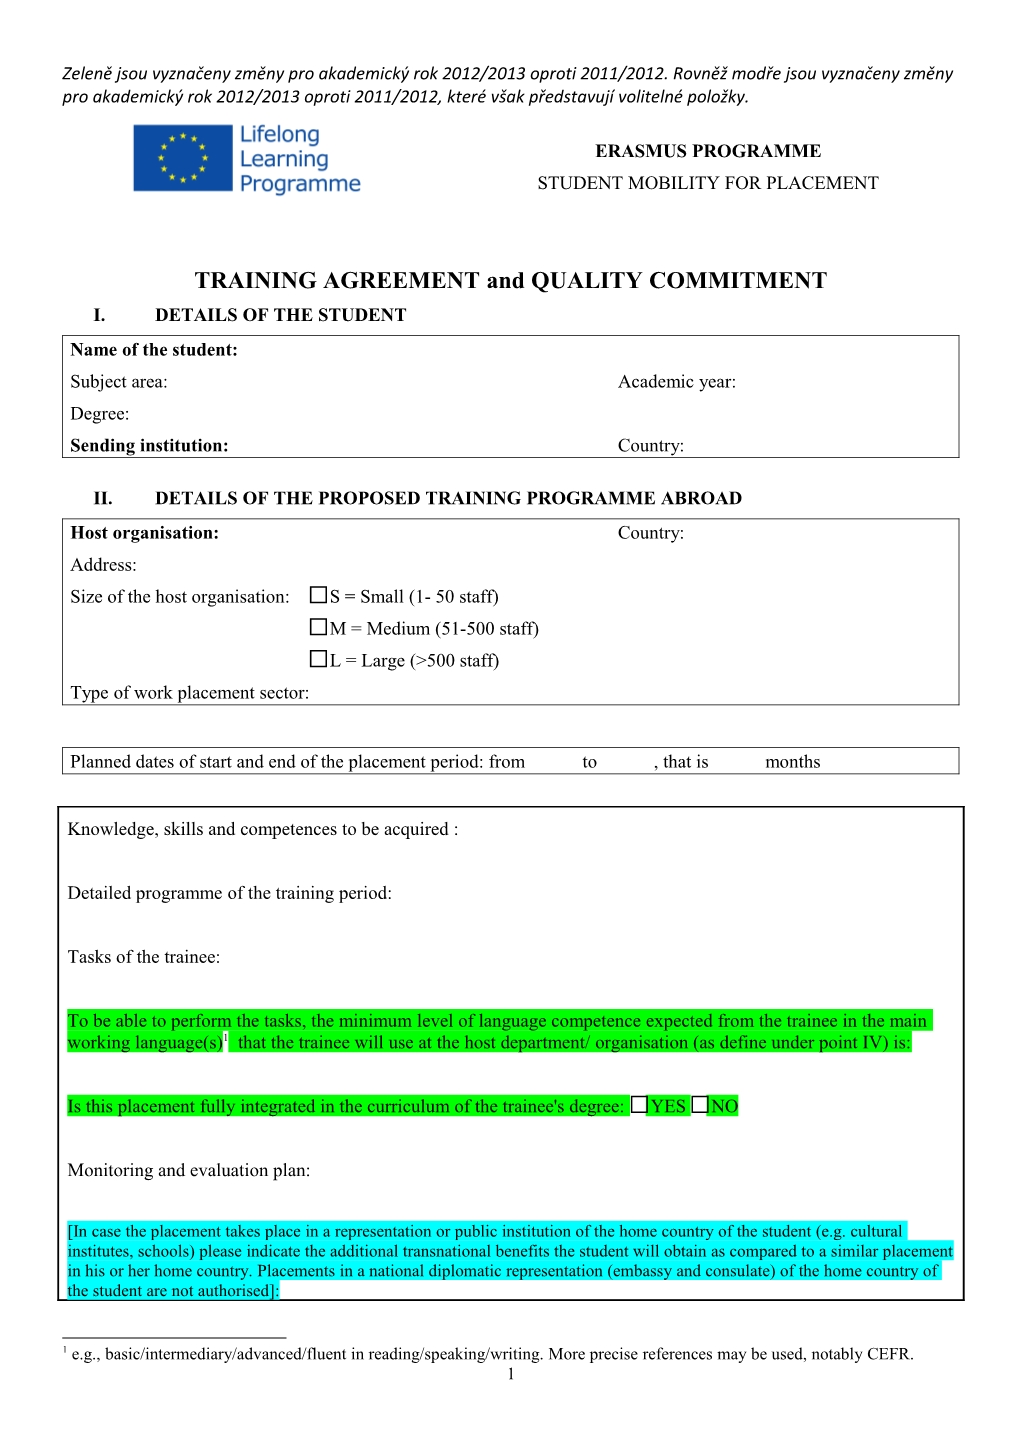 Training Agreement and Quality Commitment